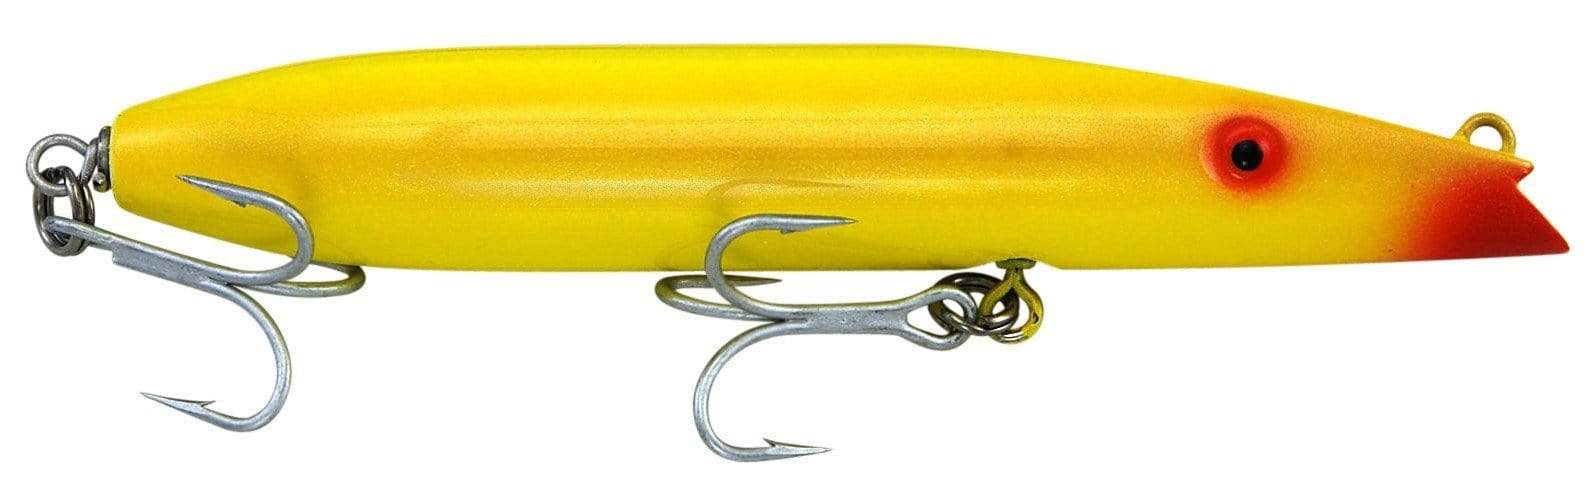  Saltwater Trolling Lure 8.8inch/6inch Fishing Soft